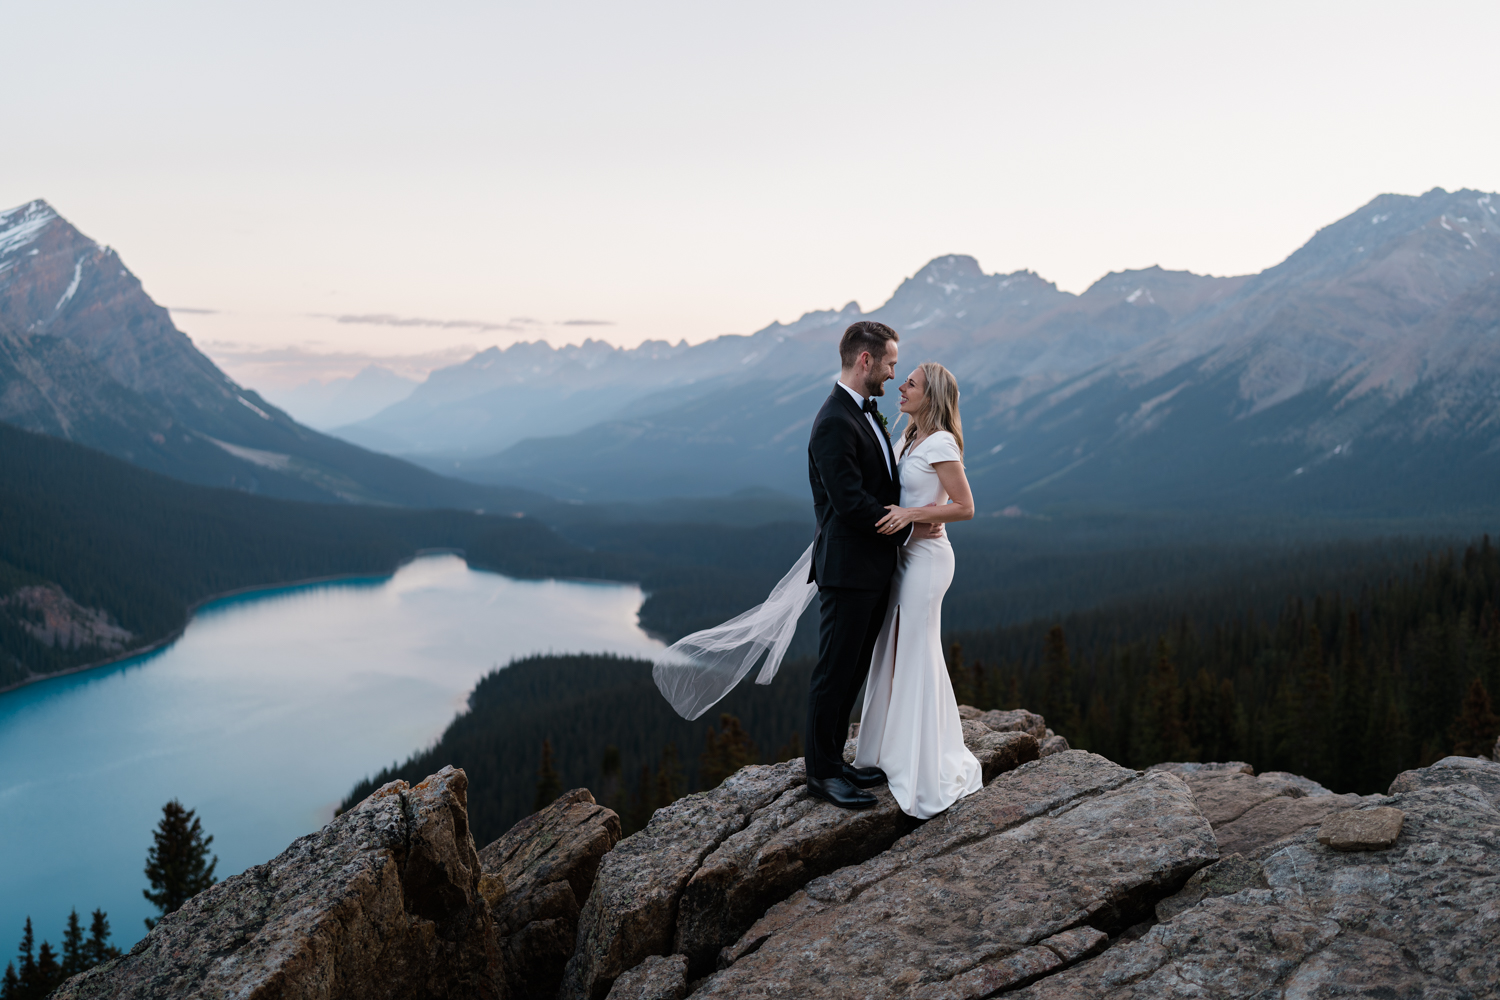 Bride and groom hold onto each other and smile as her veil blows in the wind during their Banff National Park sunrise elopement